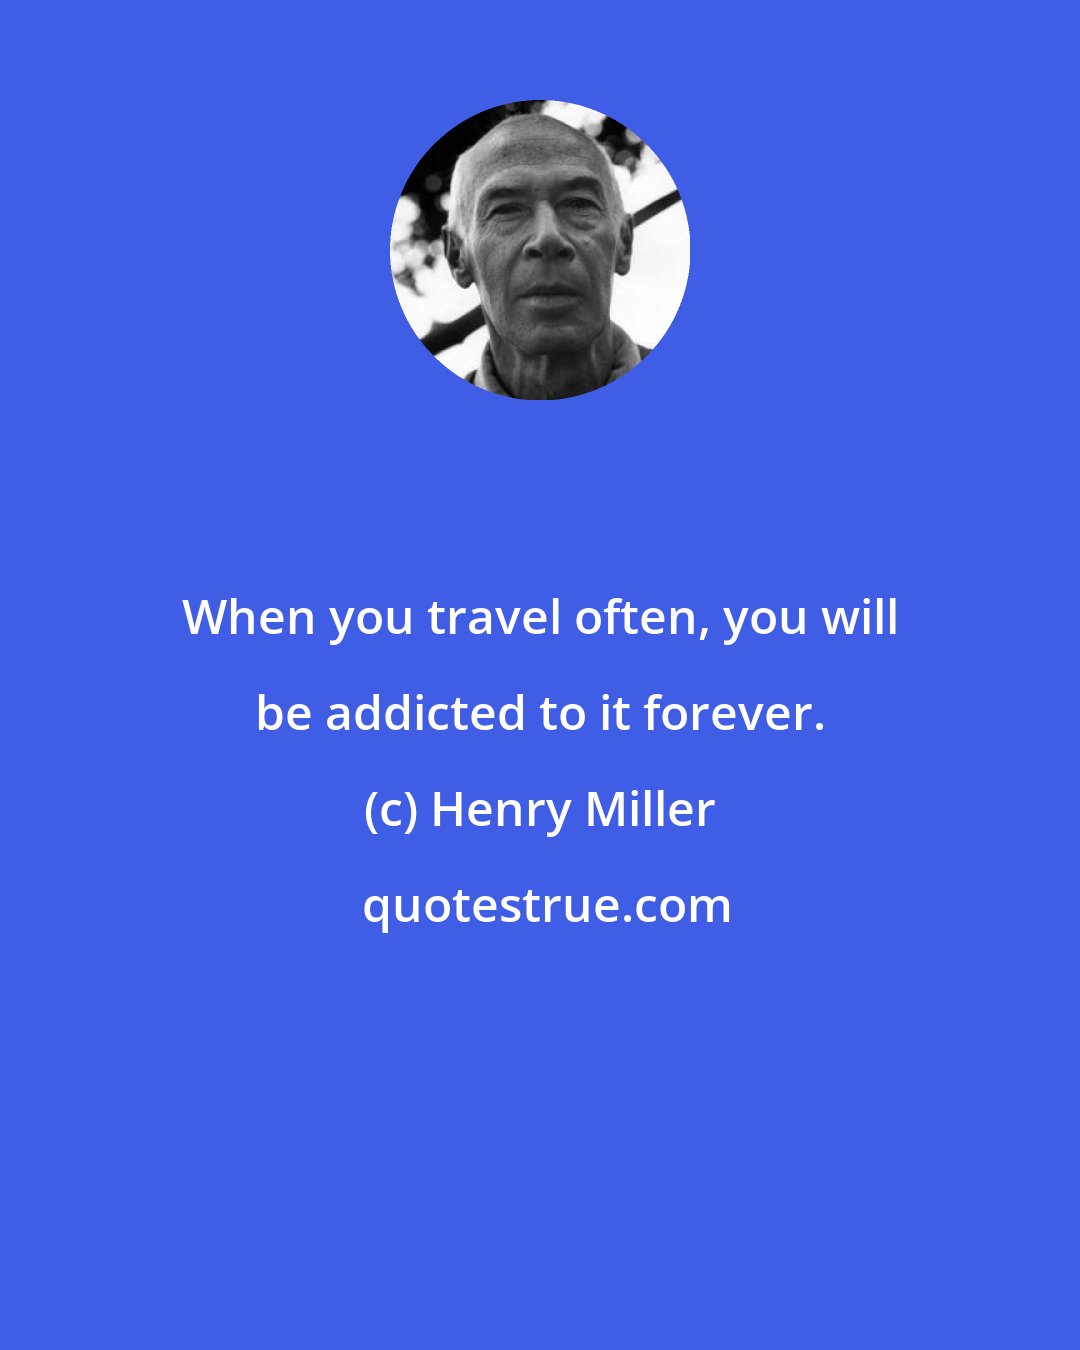 Henry Miller: When you travel often, you will be addicted to it forever.